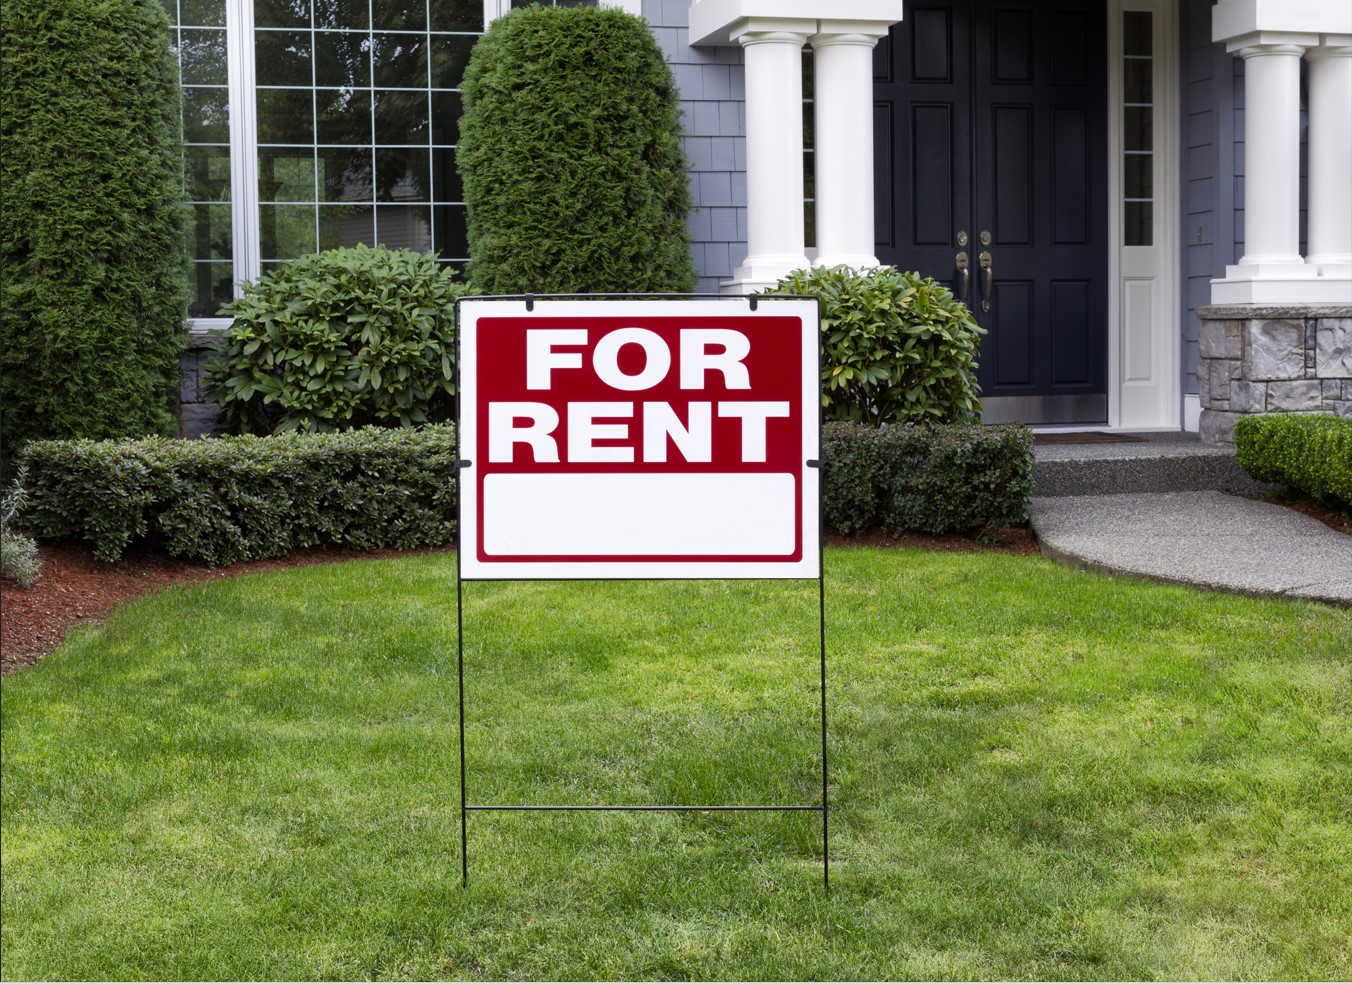 The Complete Guide to Choosing Homes for Rent in Charlotte, NC